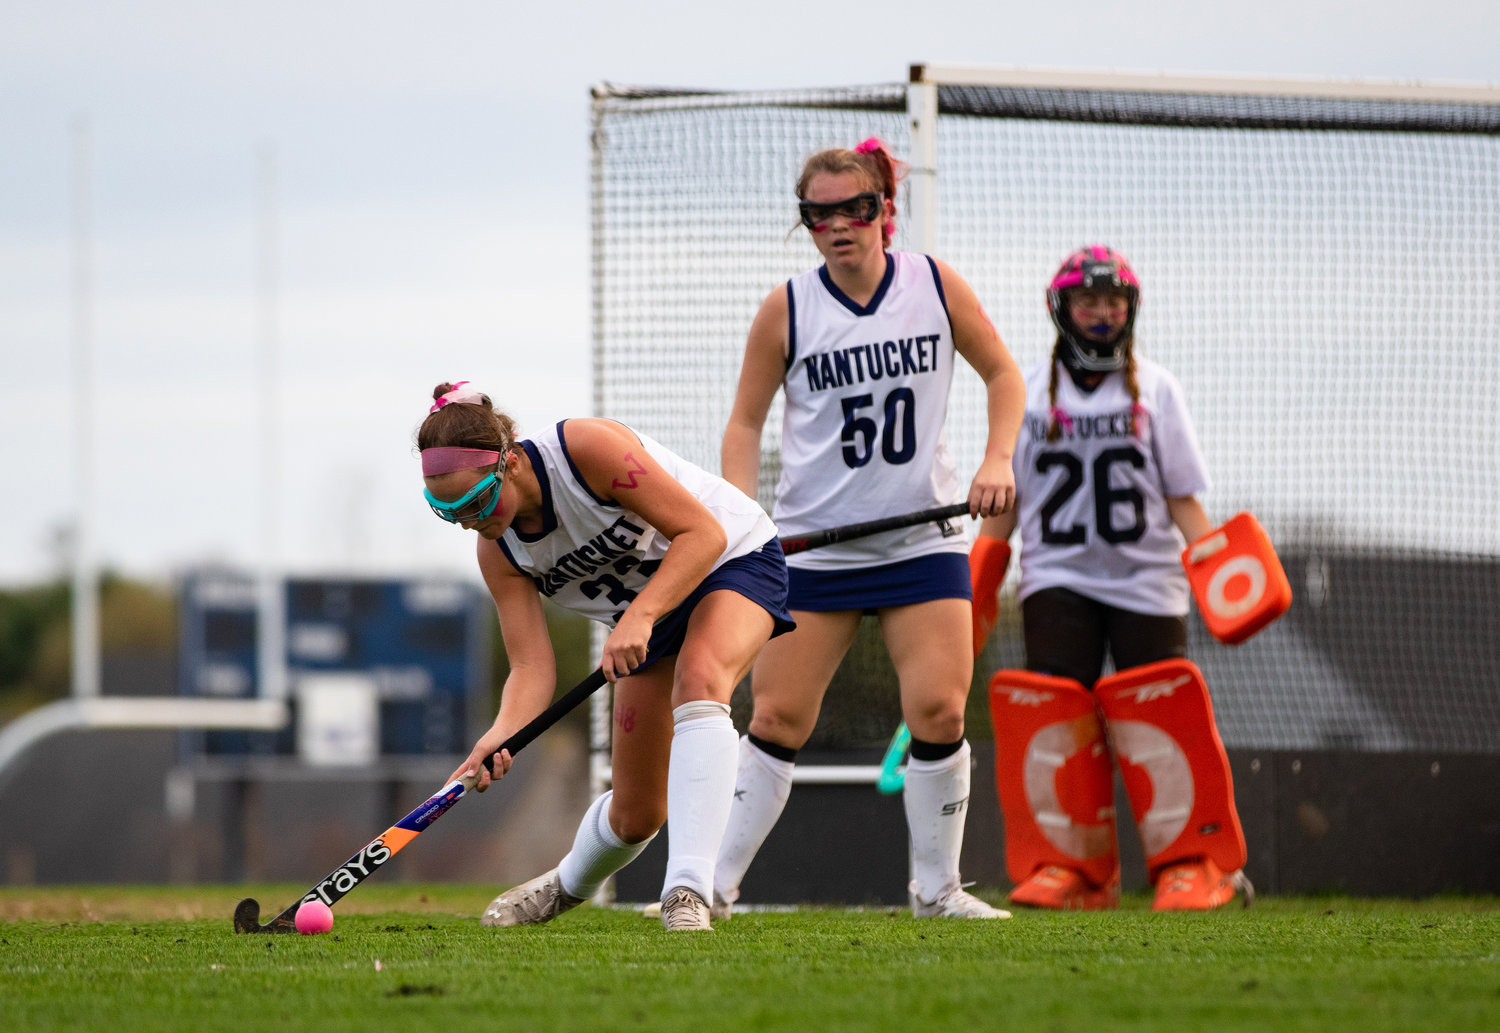 Maddie Lombardi leads the Whalers' transition in front of defender Mayson Lower and goalie Shelbi Harimon.